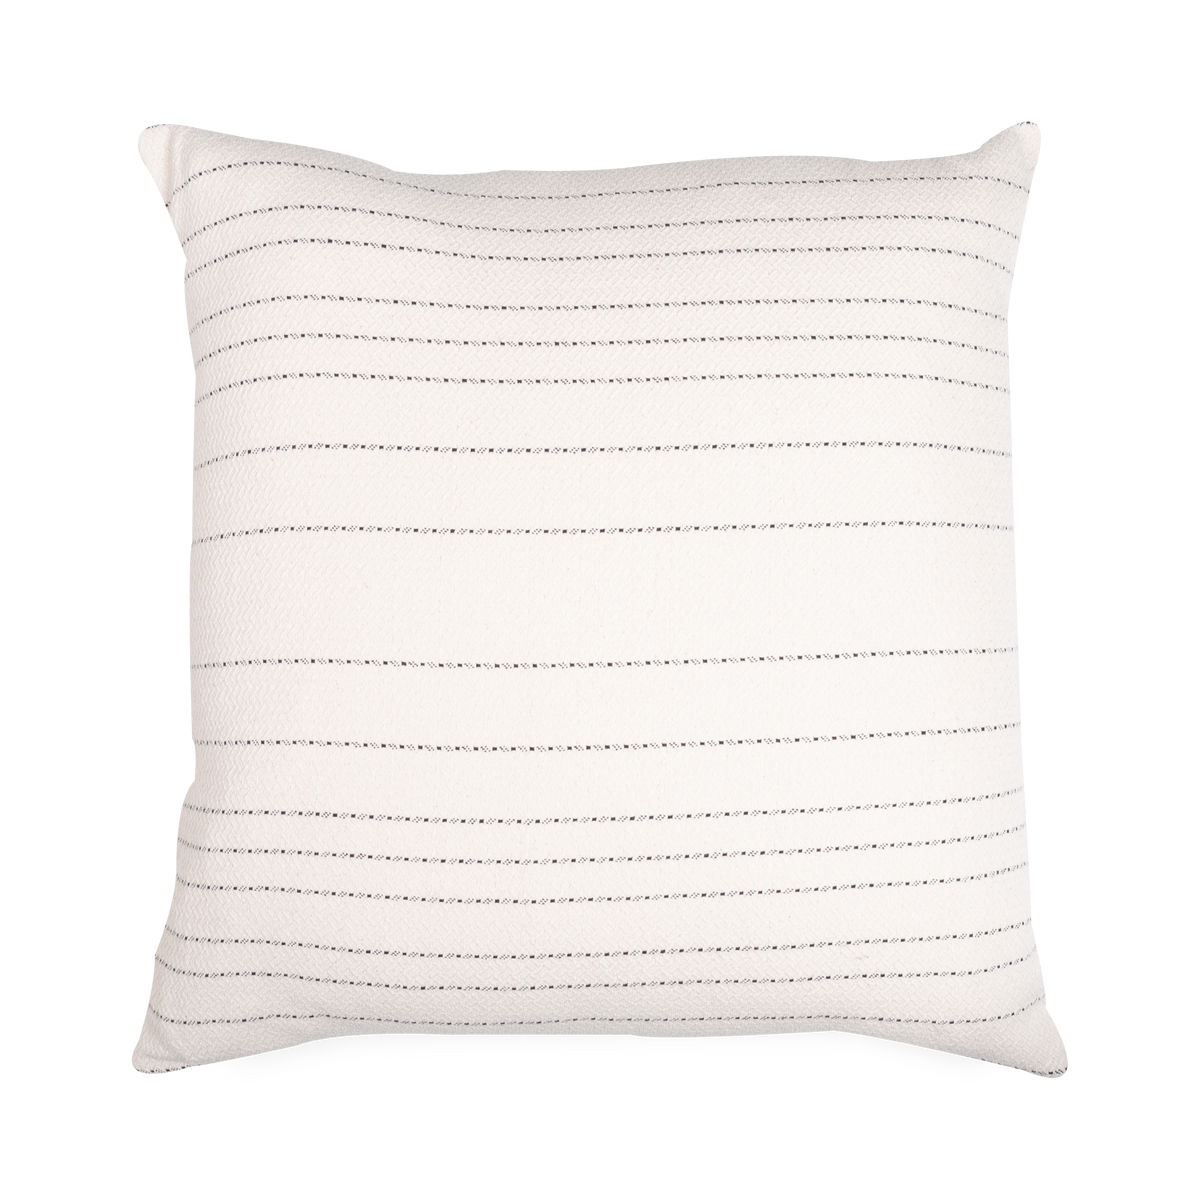 Providing a welcoming textural appeal to your seating or bedding collection, the Stitch Cotton Pillow uses a garment washed cotton to provide an exceptionally soft texture.